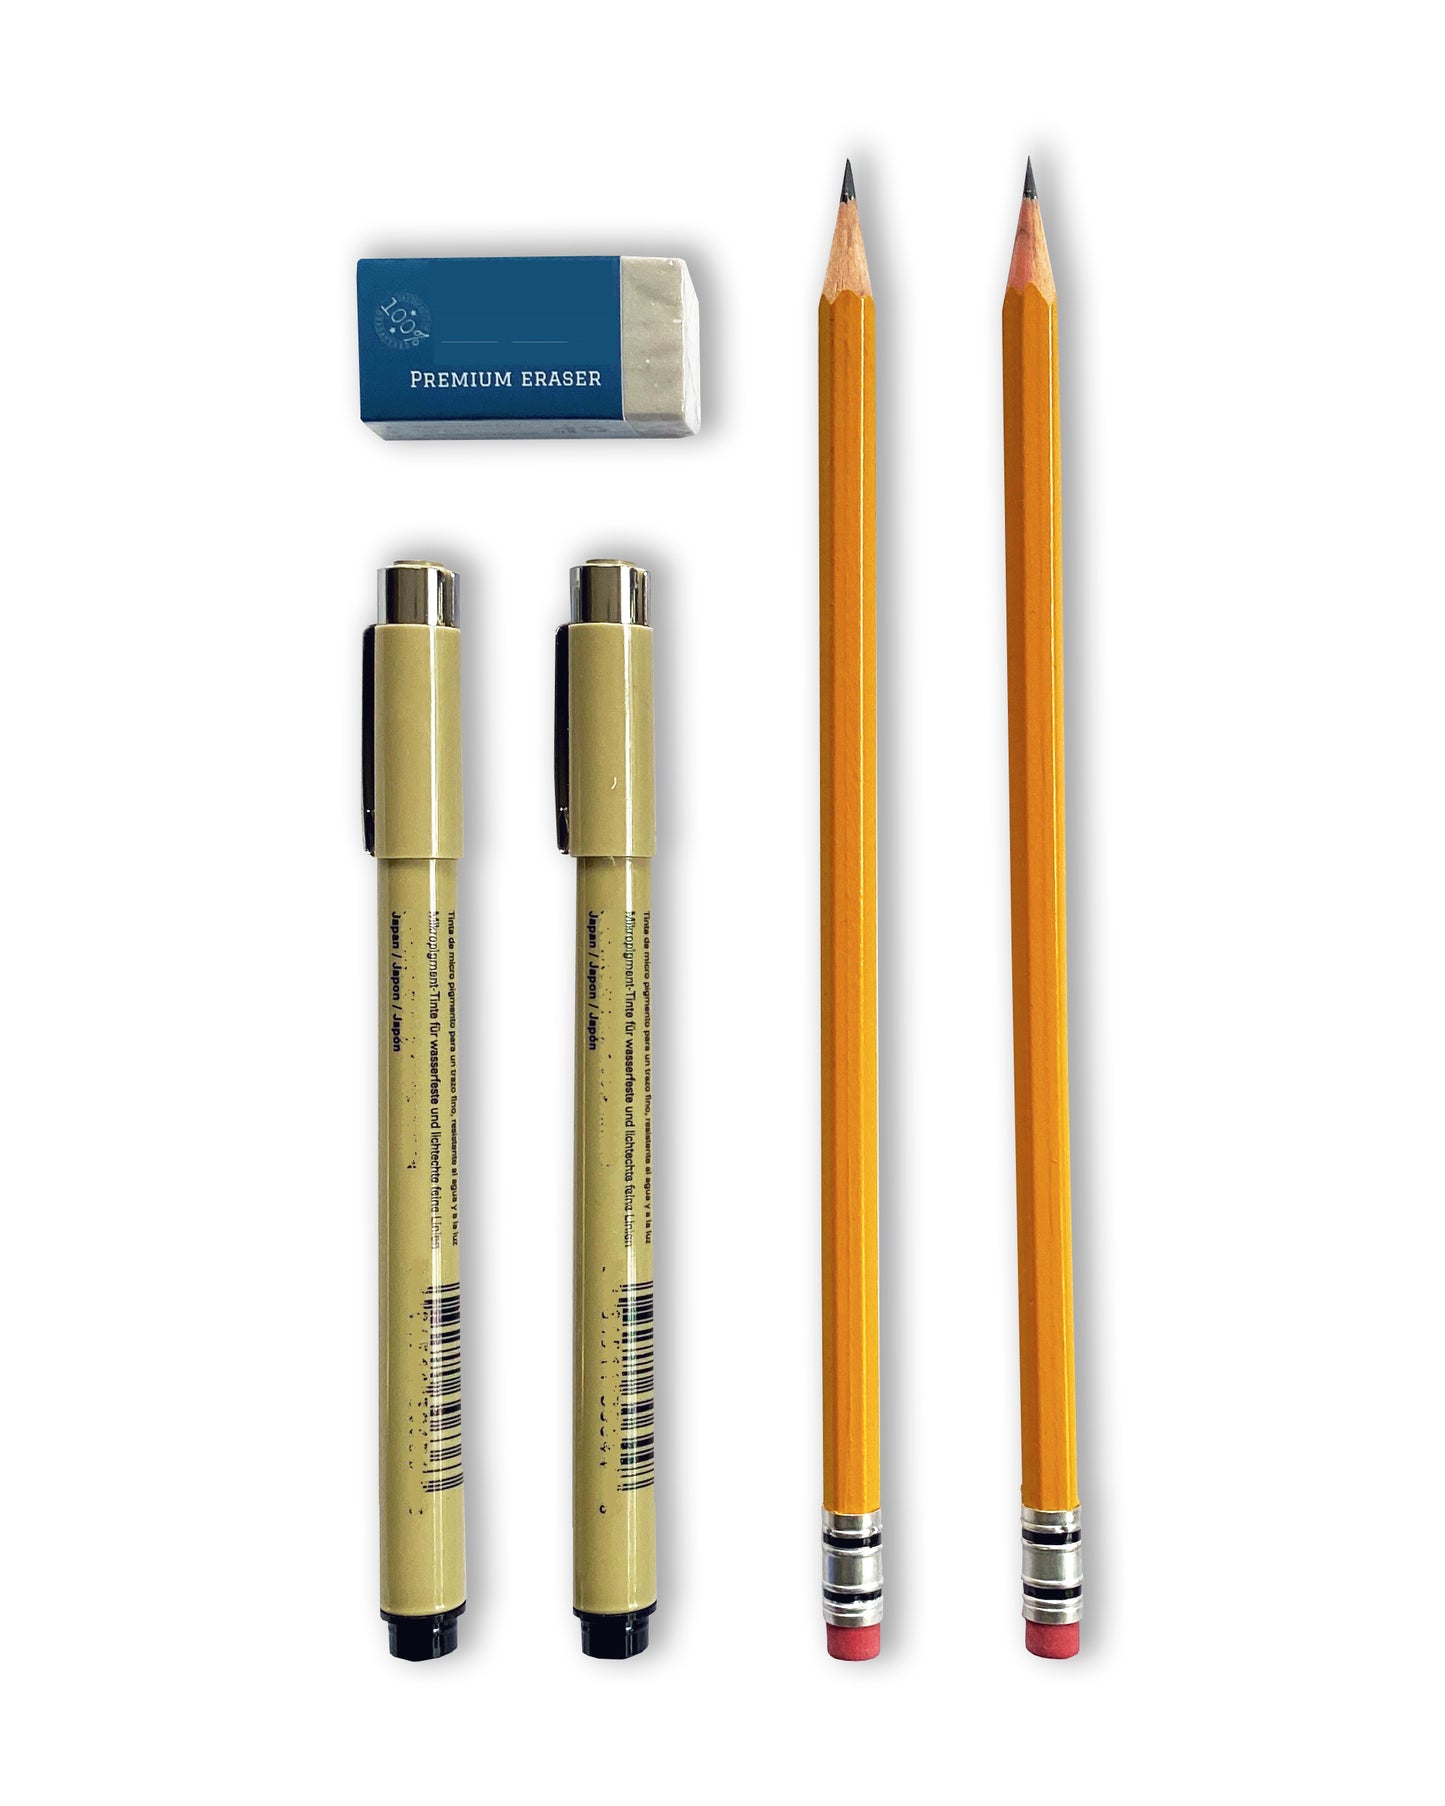 Archival-quality pen and pencil set